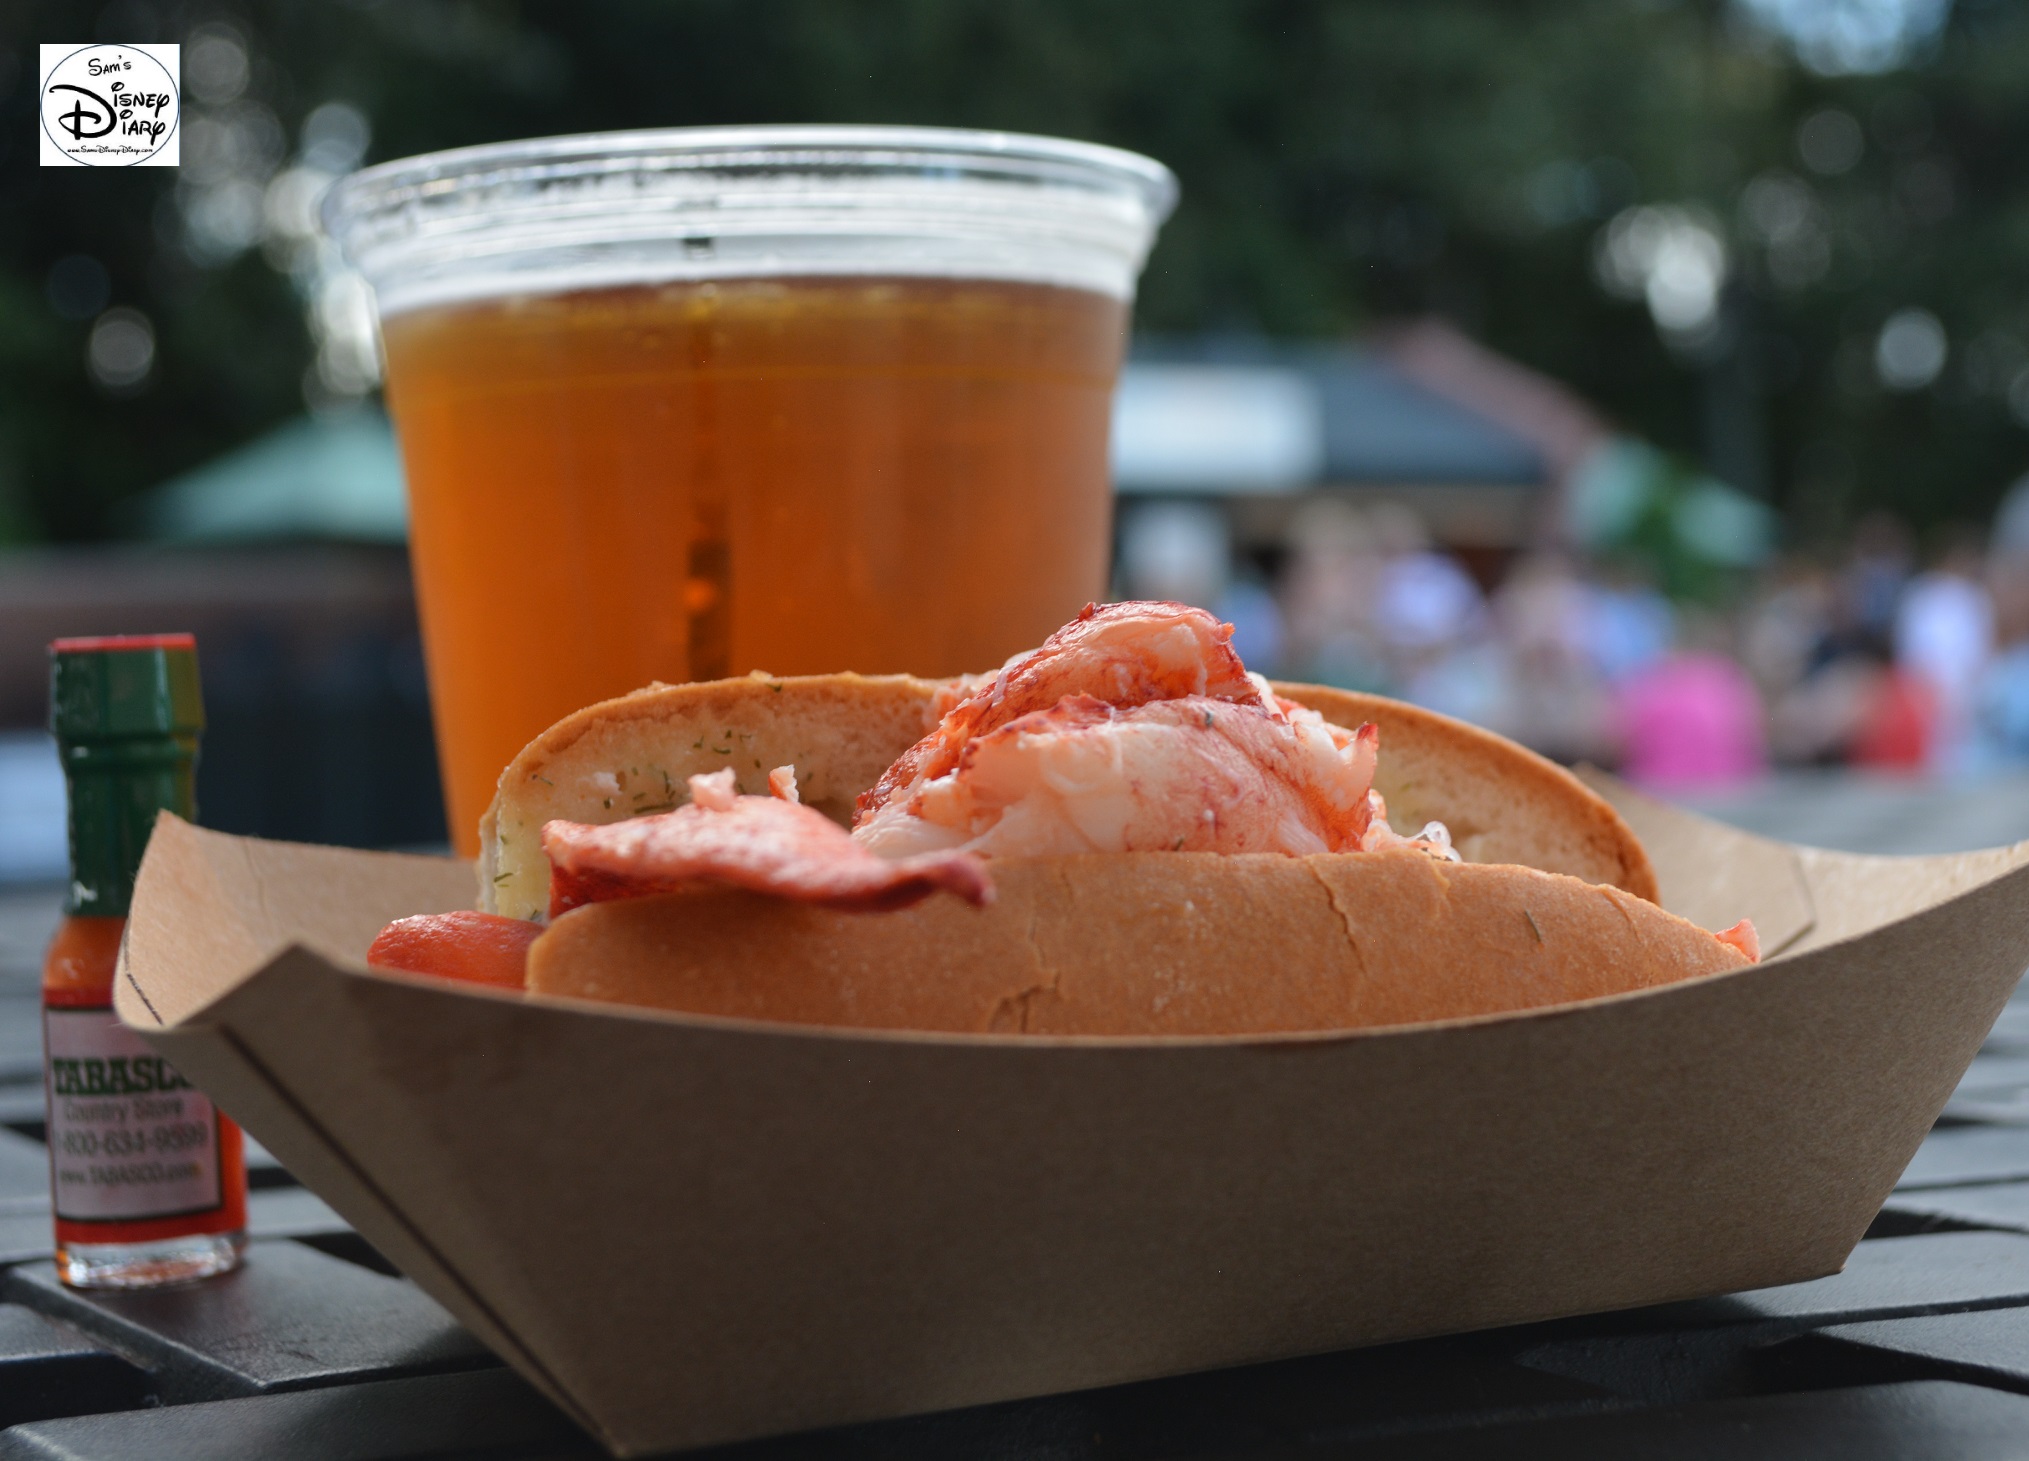 Epcot International Food and Wine Festival 2013 - My Favorite, Lobster Roll and a Samuel Adams